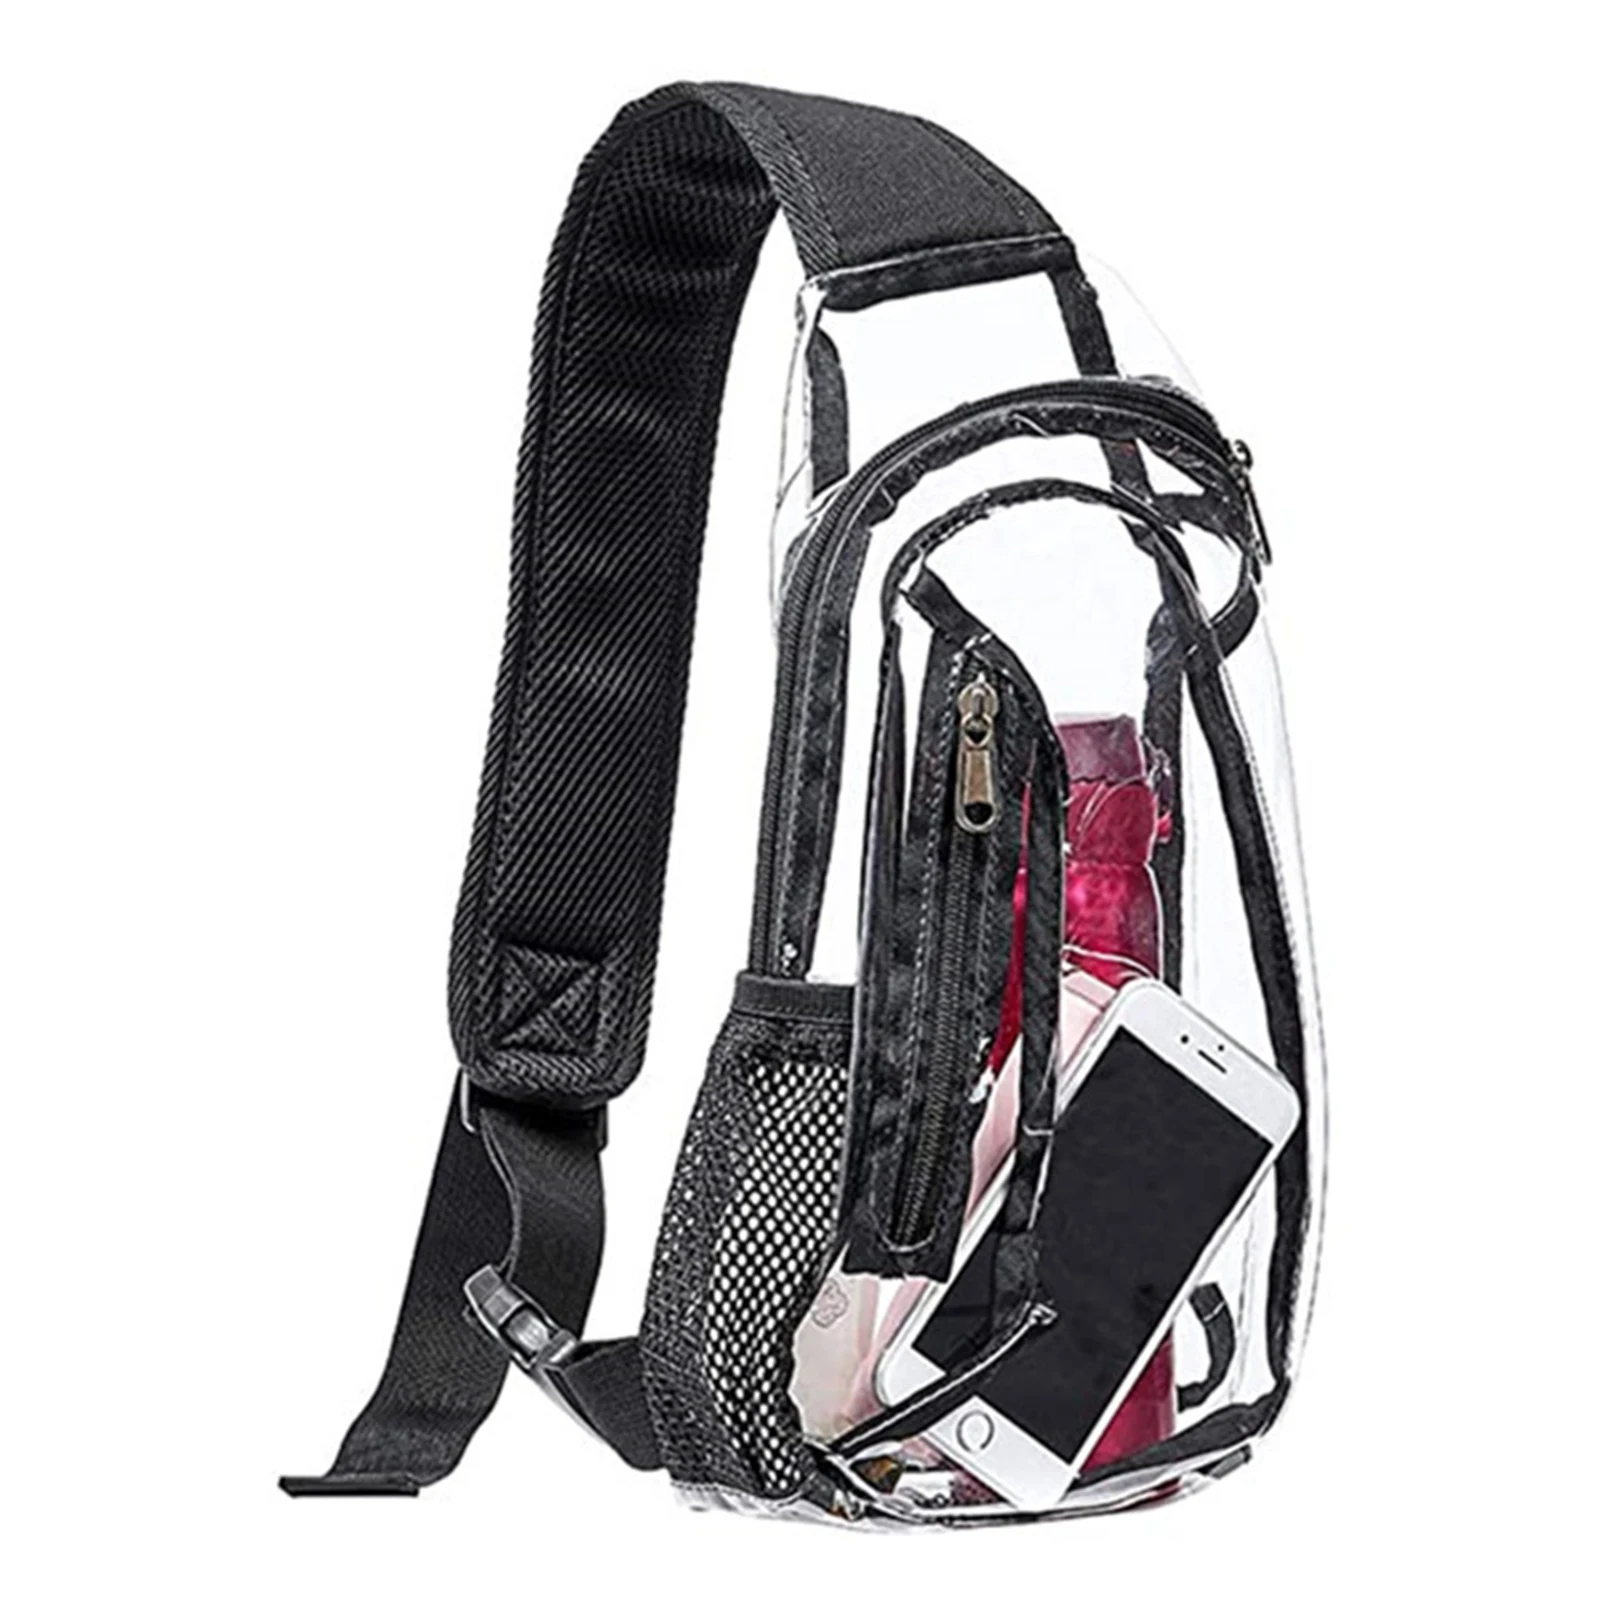 

Clear Sling Bag Stadium Approved See Through PVC Chest Bag With Front Zipper Pocket For Stadium Concert Travel